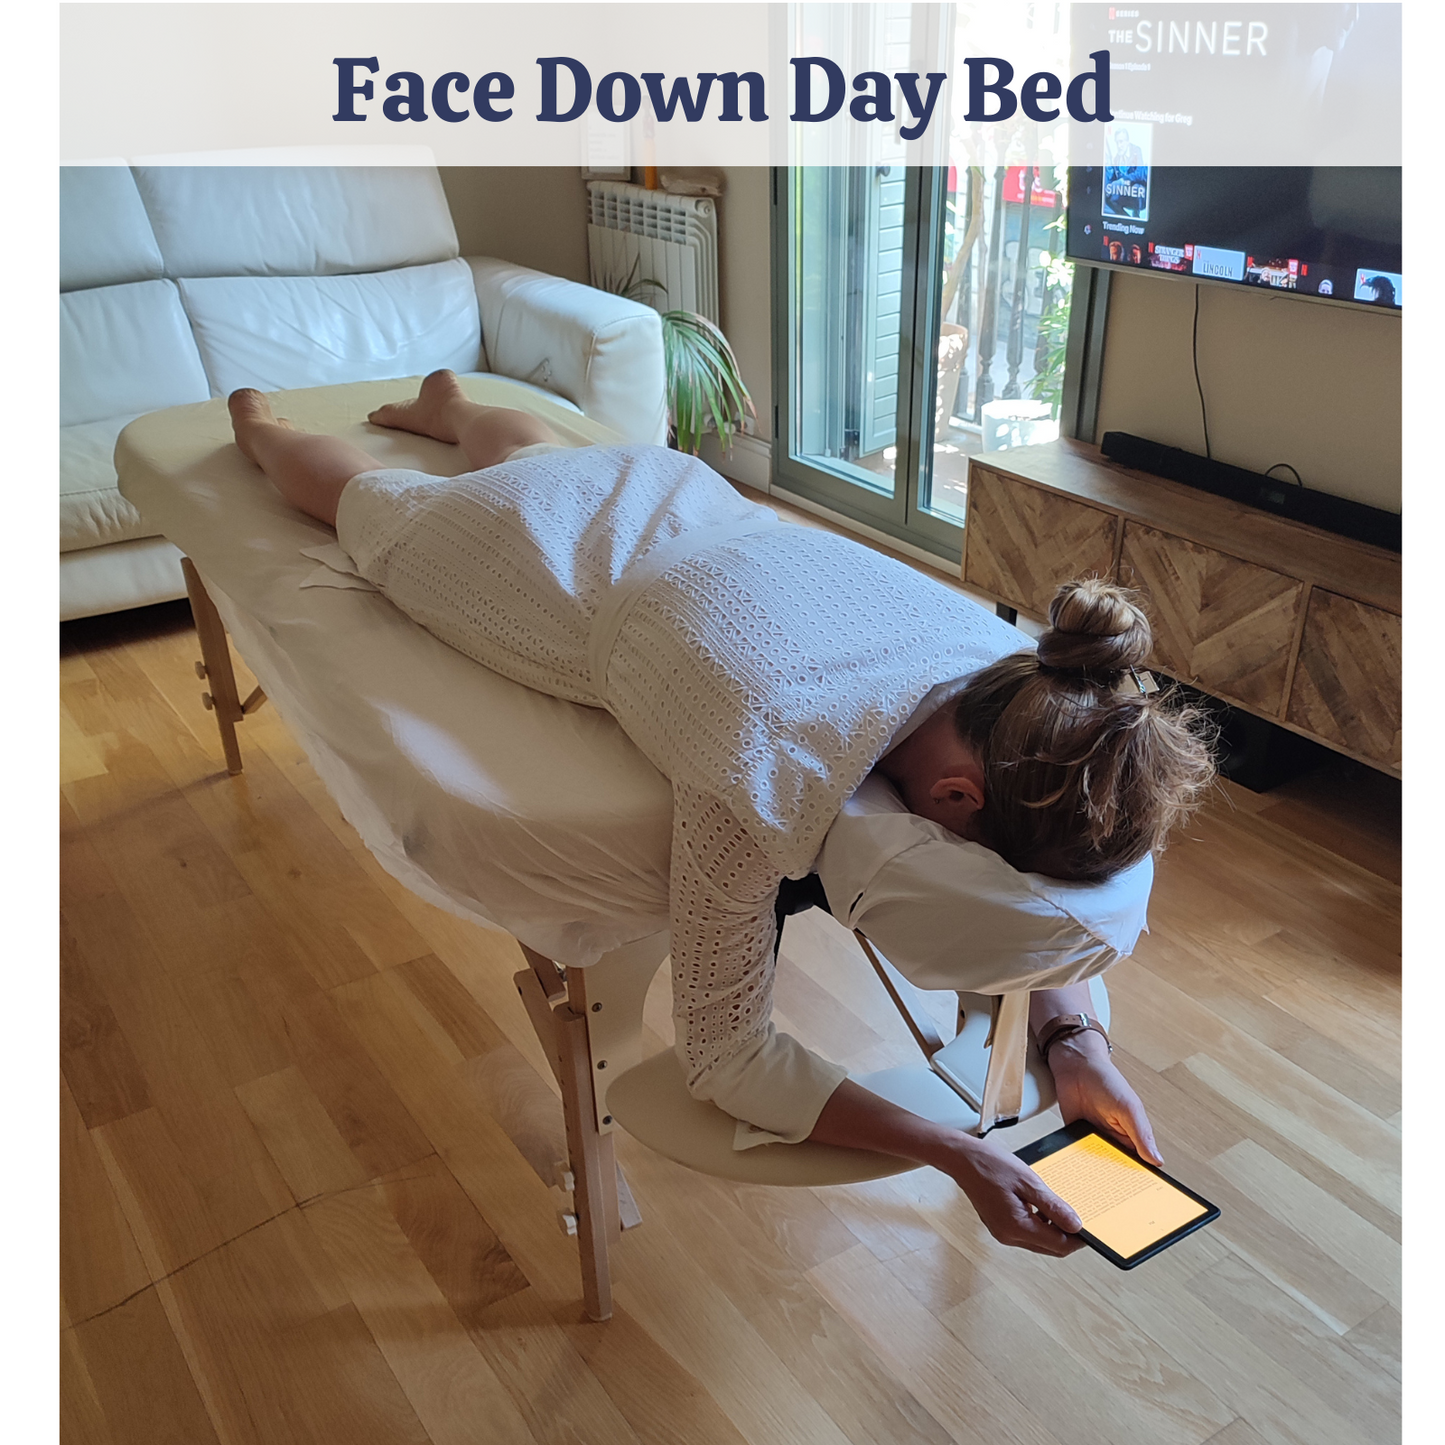 Face Down Solutions, Facedownrental, Vitrectomy Recovery